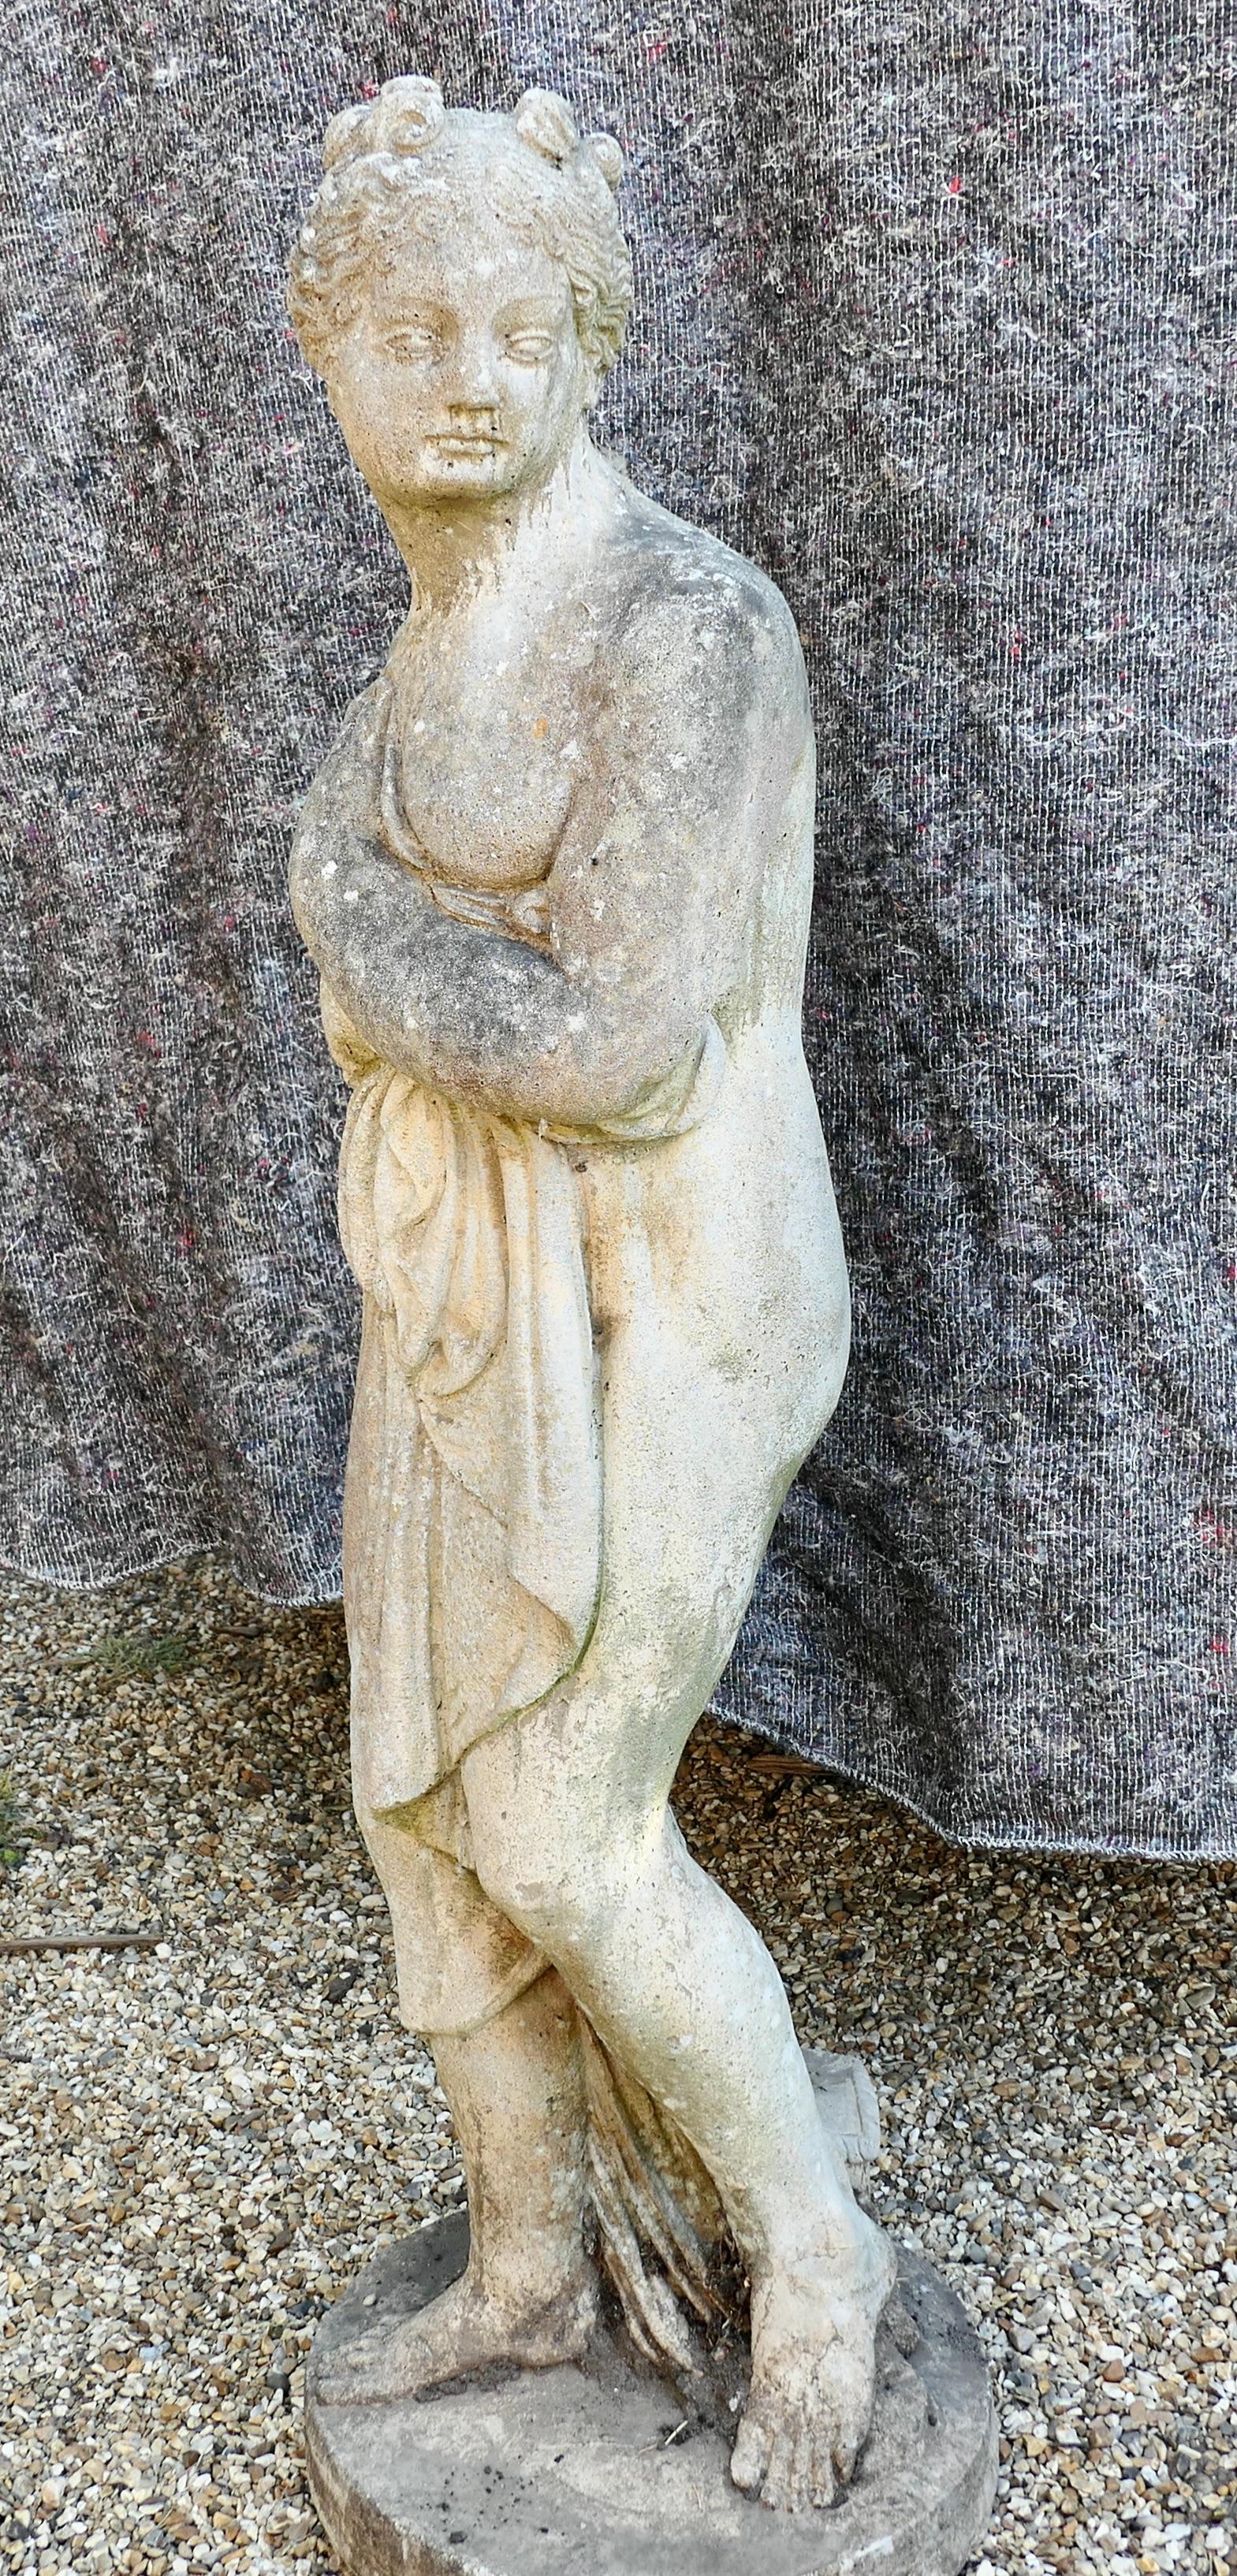 A large weathered Neoclassical statue of Pandora.

Large weather patinated neoclassical statue of Pandora with her box at her feet.
Our lovely girl is 4ft tall set on a 15” diameter base holding her clothes close to her
She has no damage or